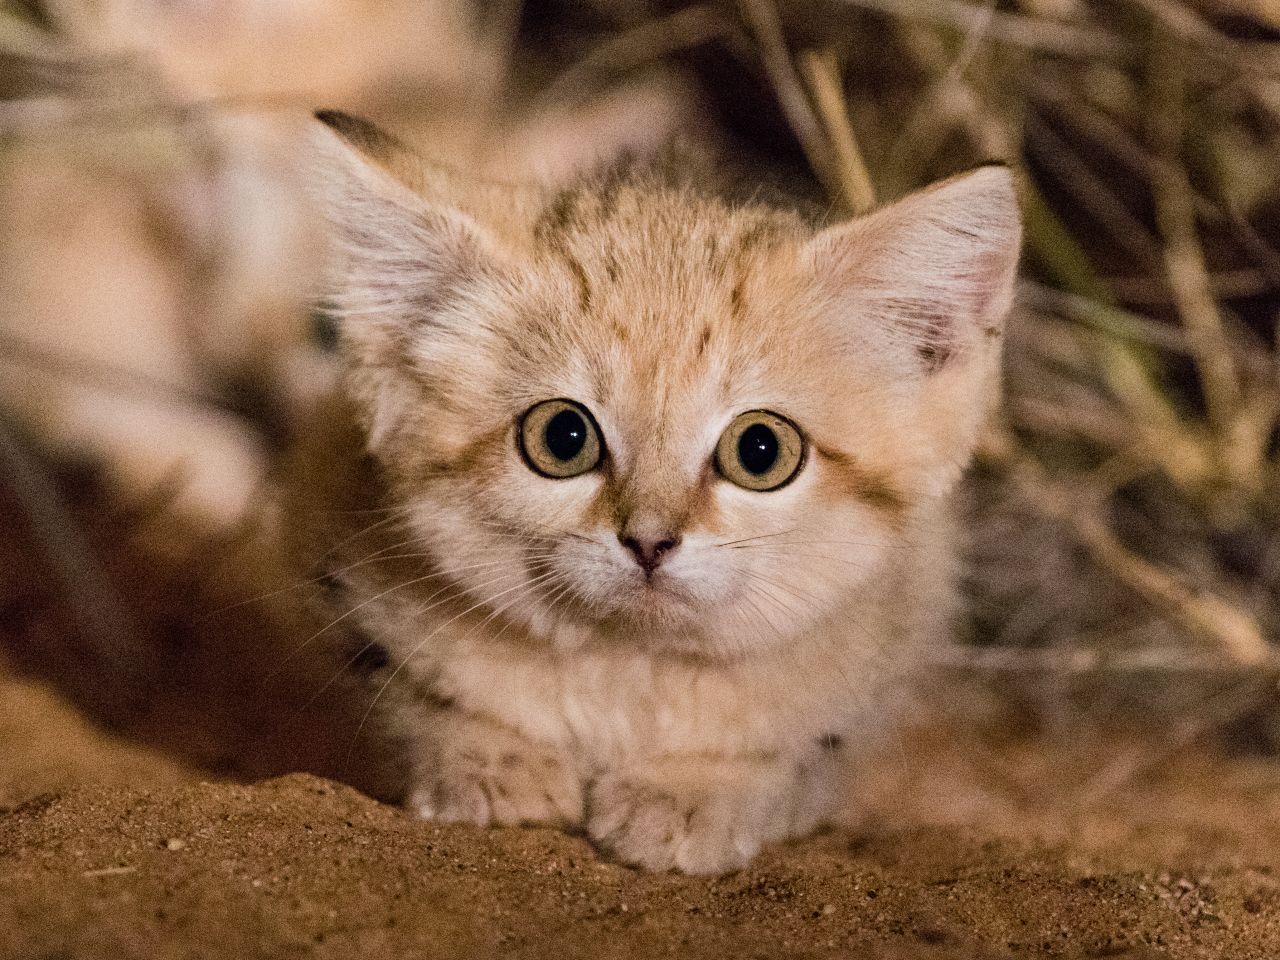 In 2017, sand kittens were photographed in the wild for the first time. The images of the adorable fluffballs went viral, as few people had seen them before, and not even scientists knew much about the species.